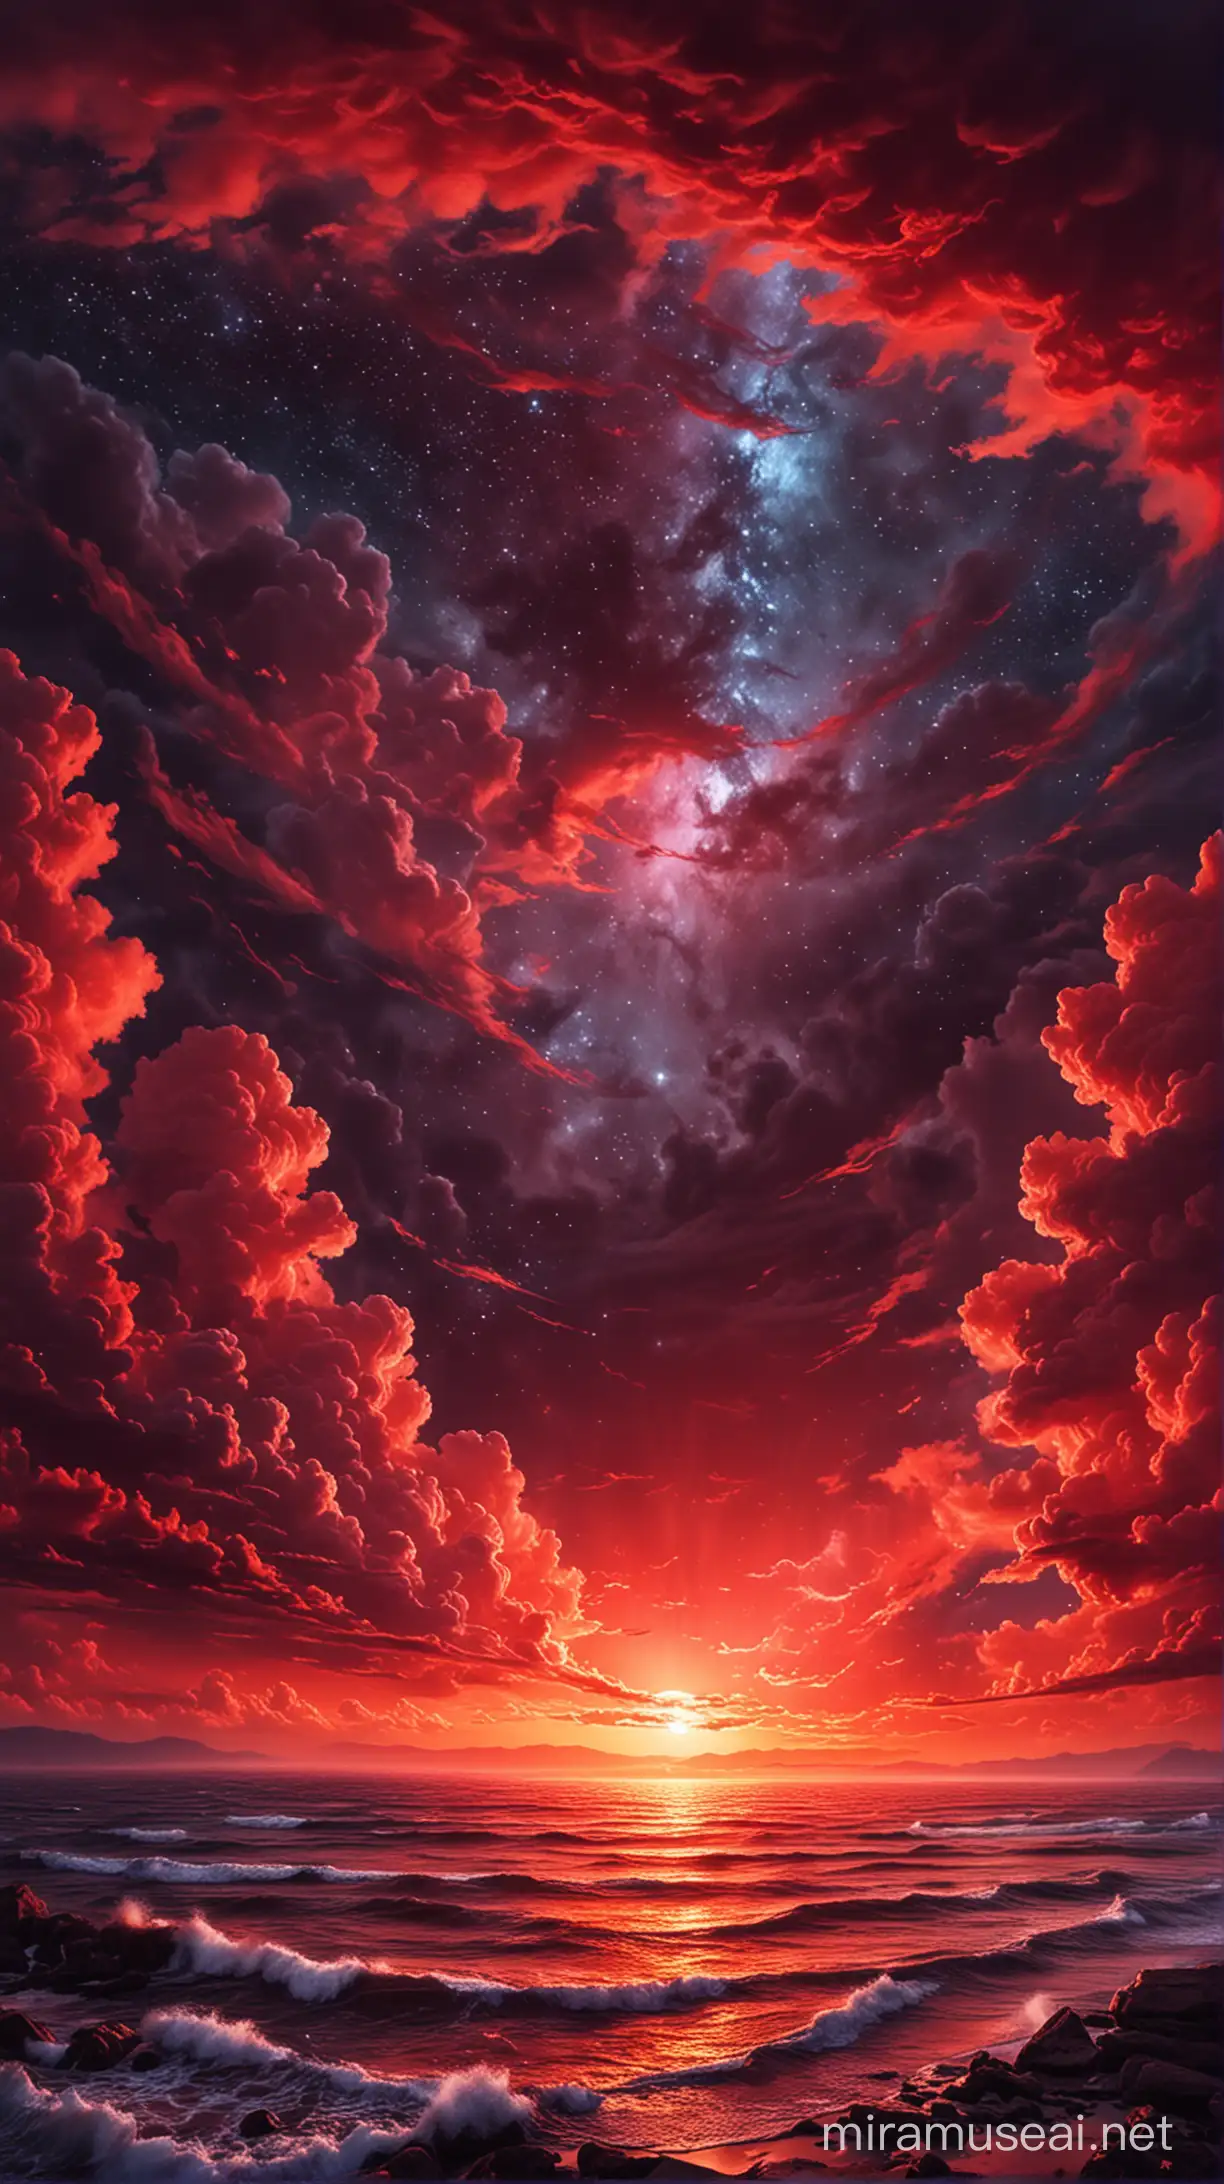 Vibrant Red Dream Sky with Silhouetted Figures